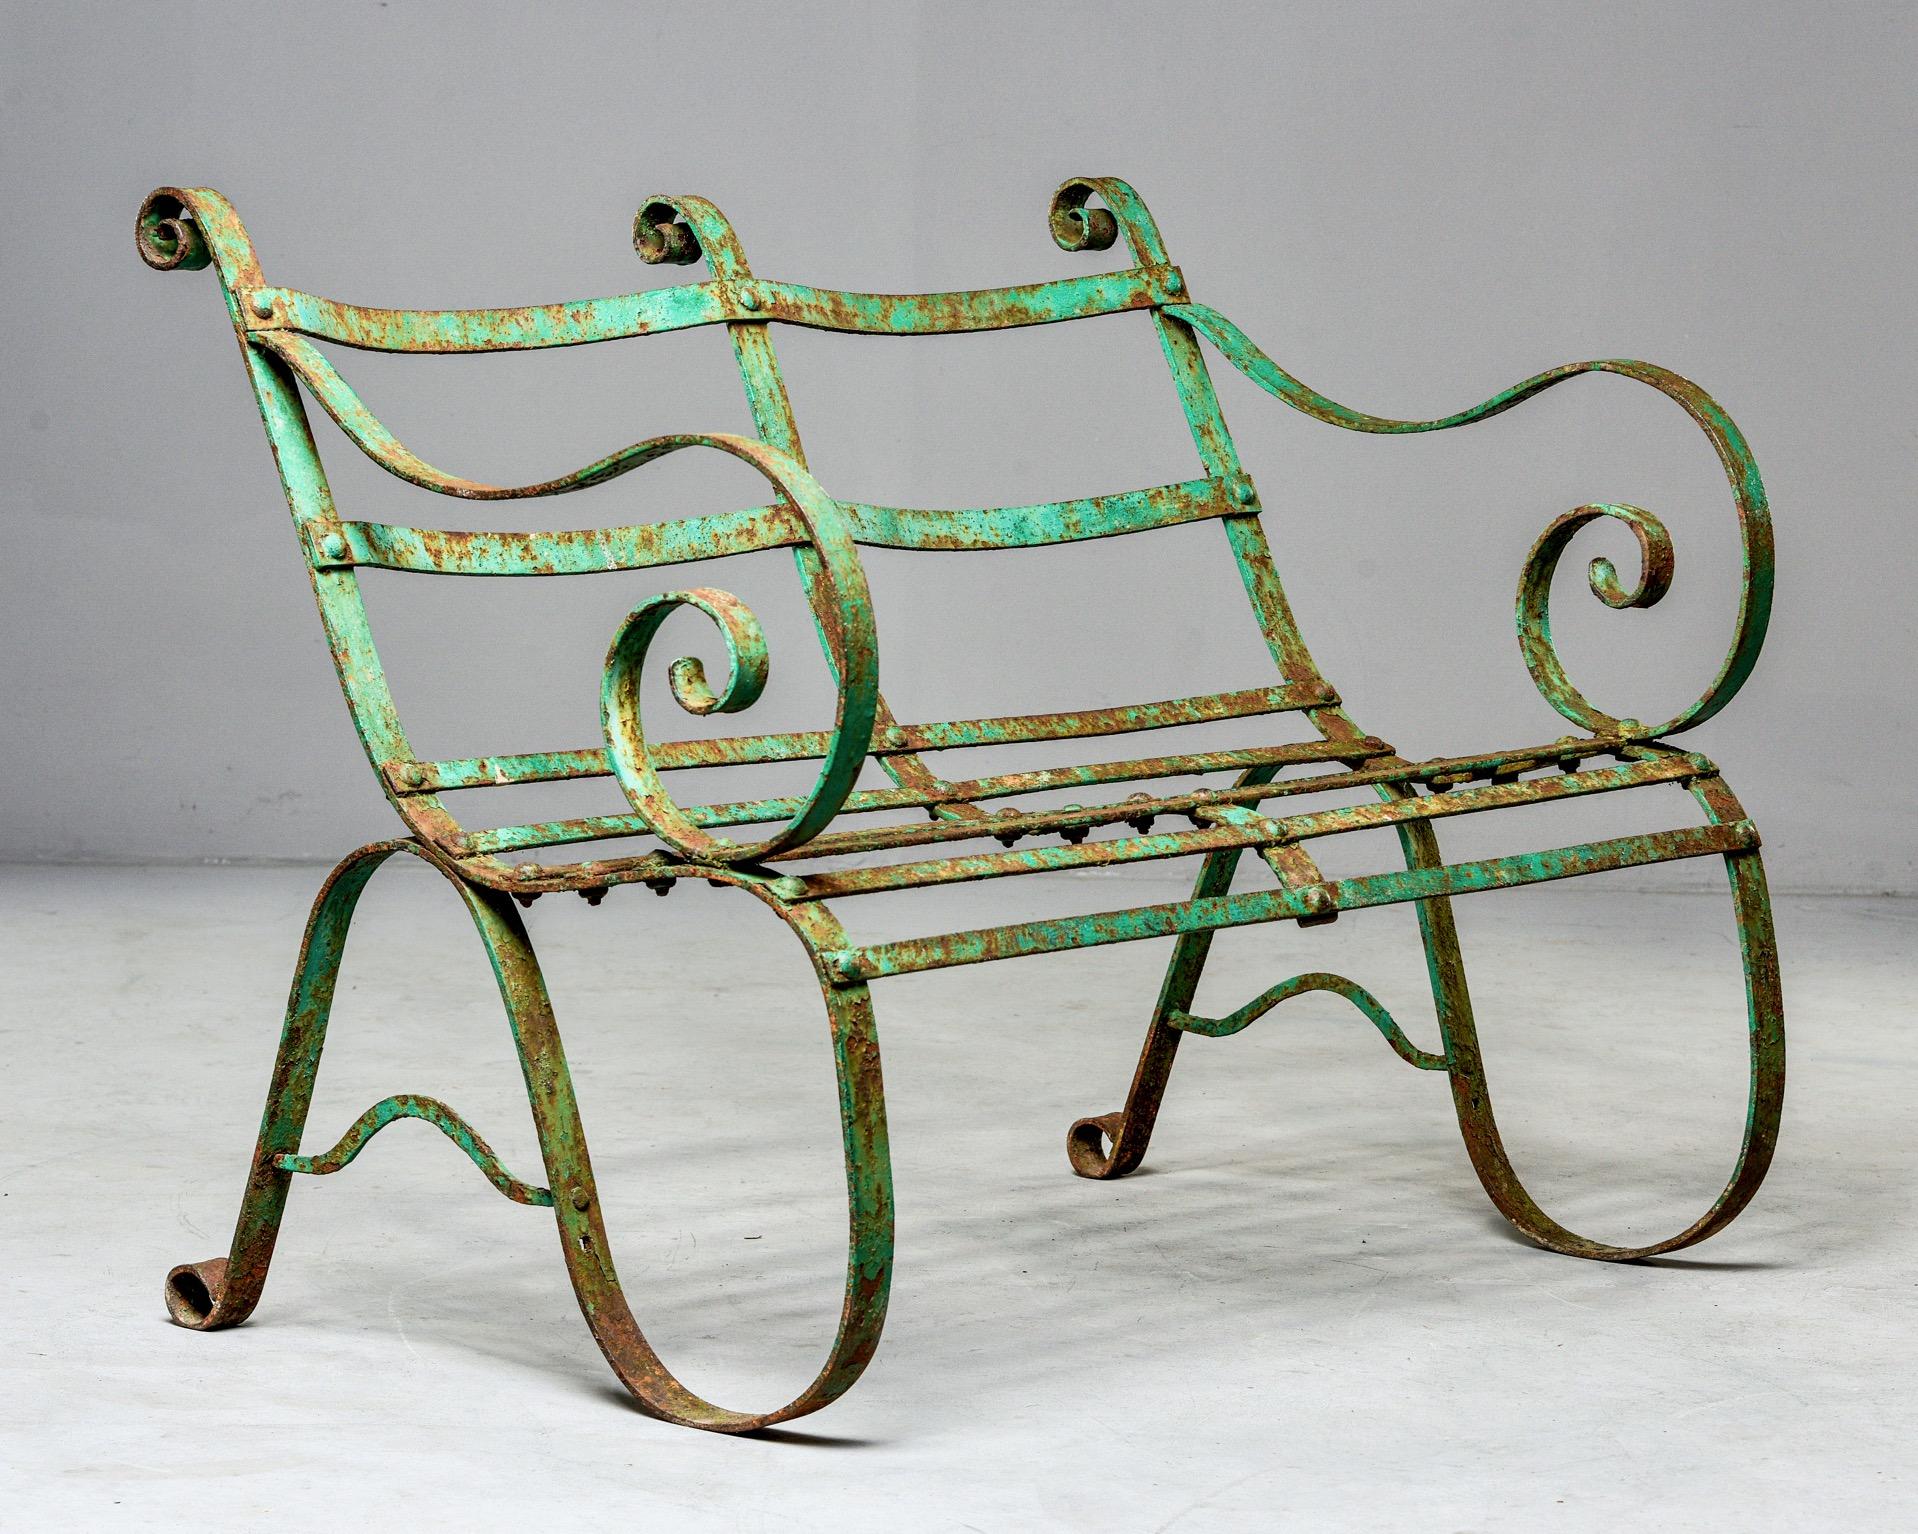 Early 19th century English two-seat garden bench features a curvy, metal frame and original green paint. Unknown maker.
Measures: Seat height 16”, seat width 38.25”
Seat depth 16.5”, arm height 27.25”.